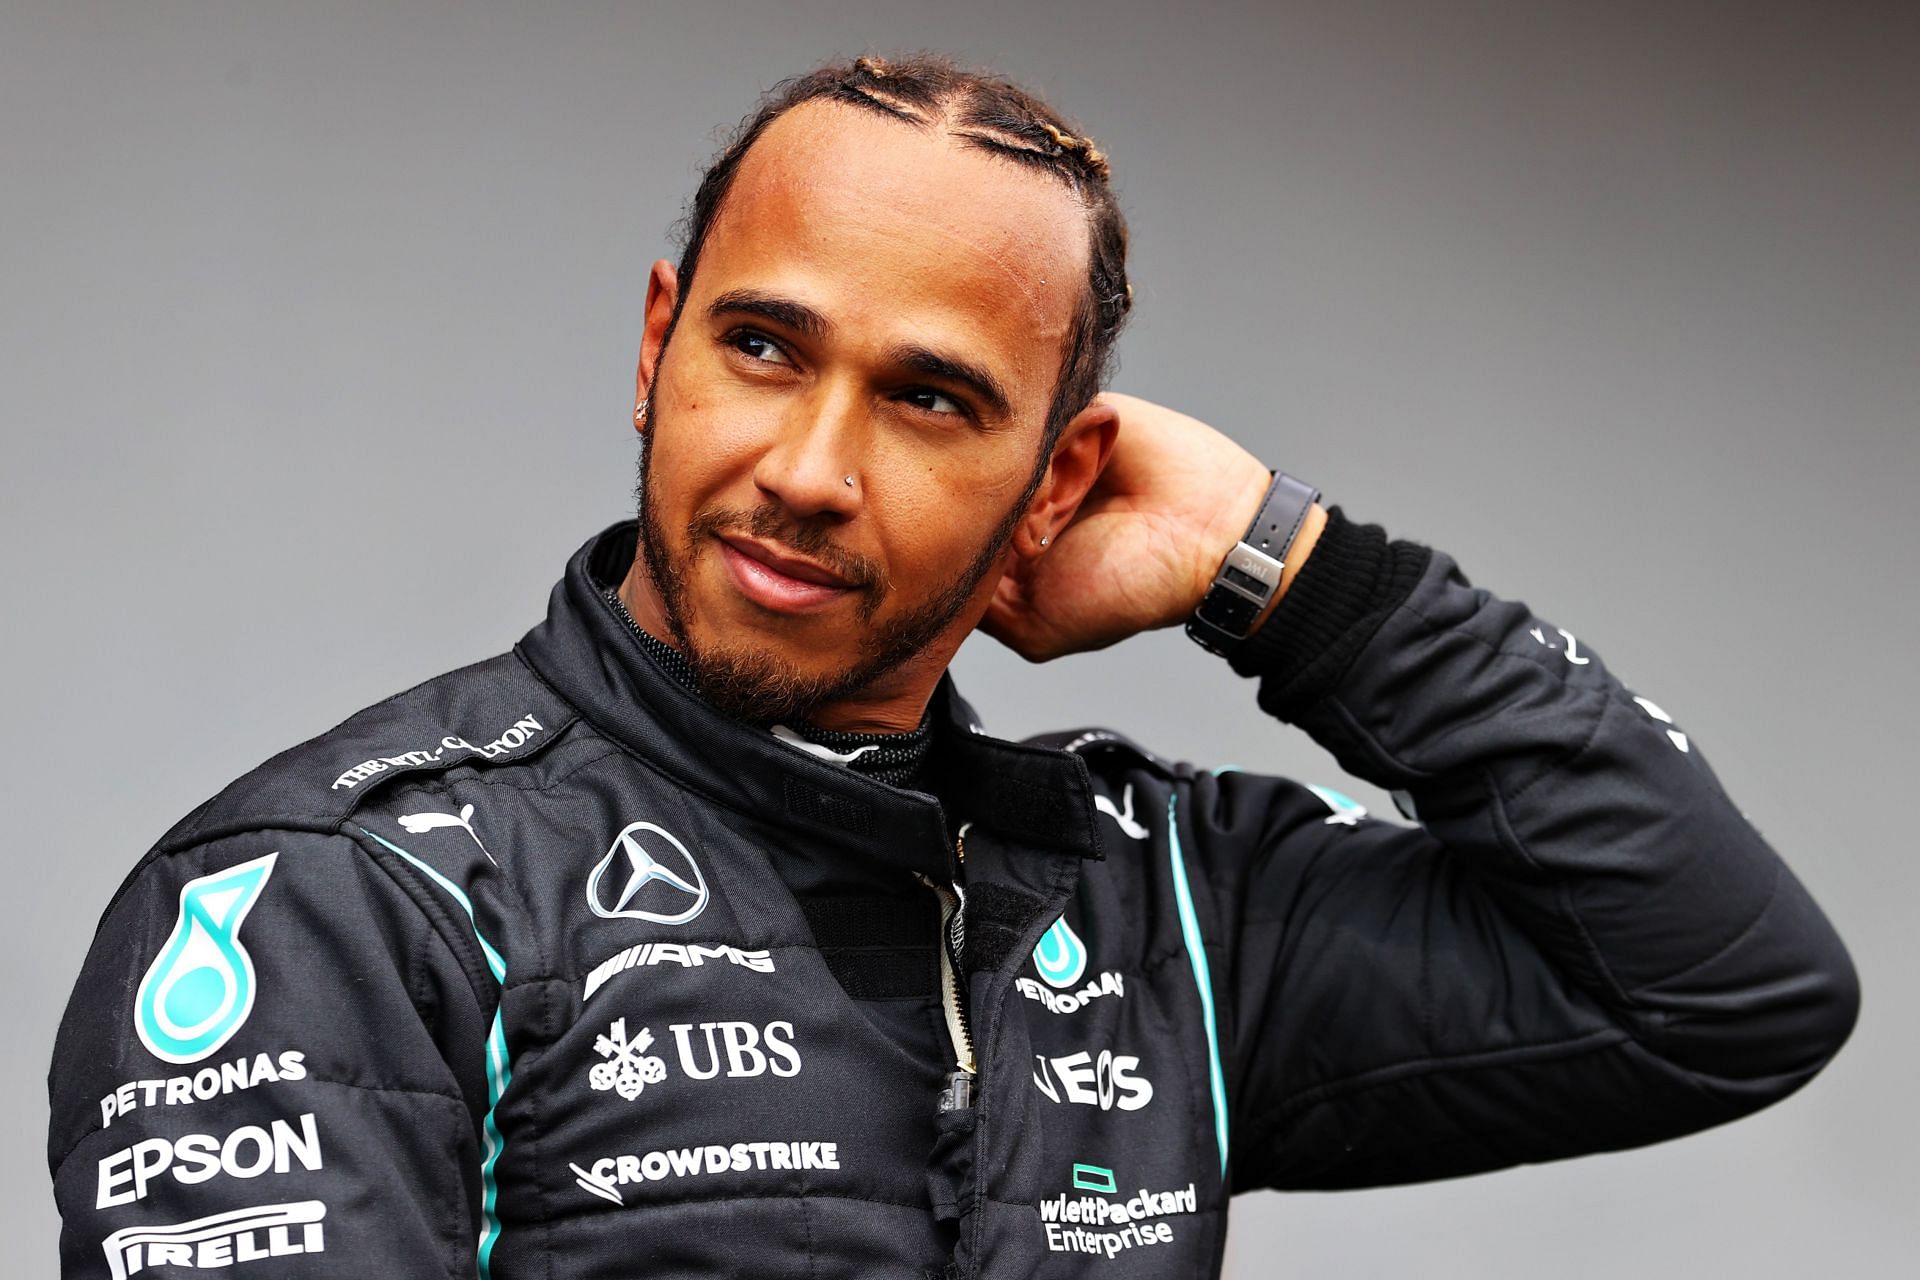 Lewis Hamilton has often used his platform in F1 to bring to light pressing issues around the world